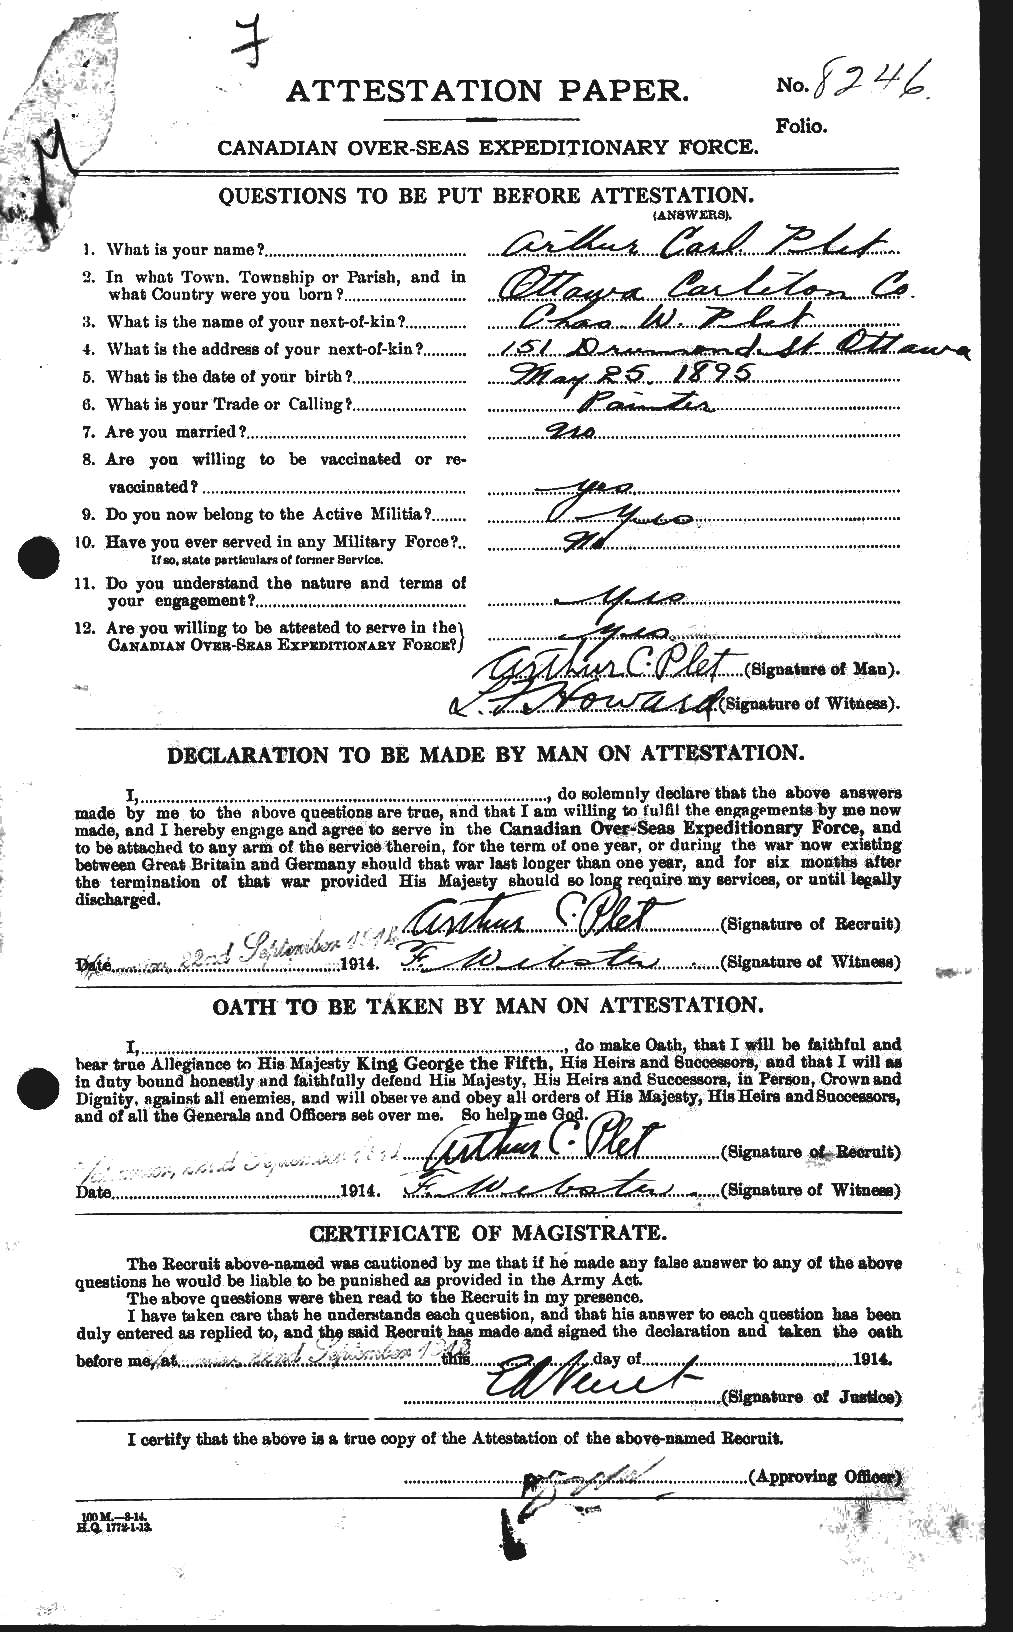 Personnel Records of the First World War - CEF 580395a